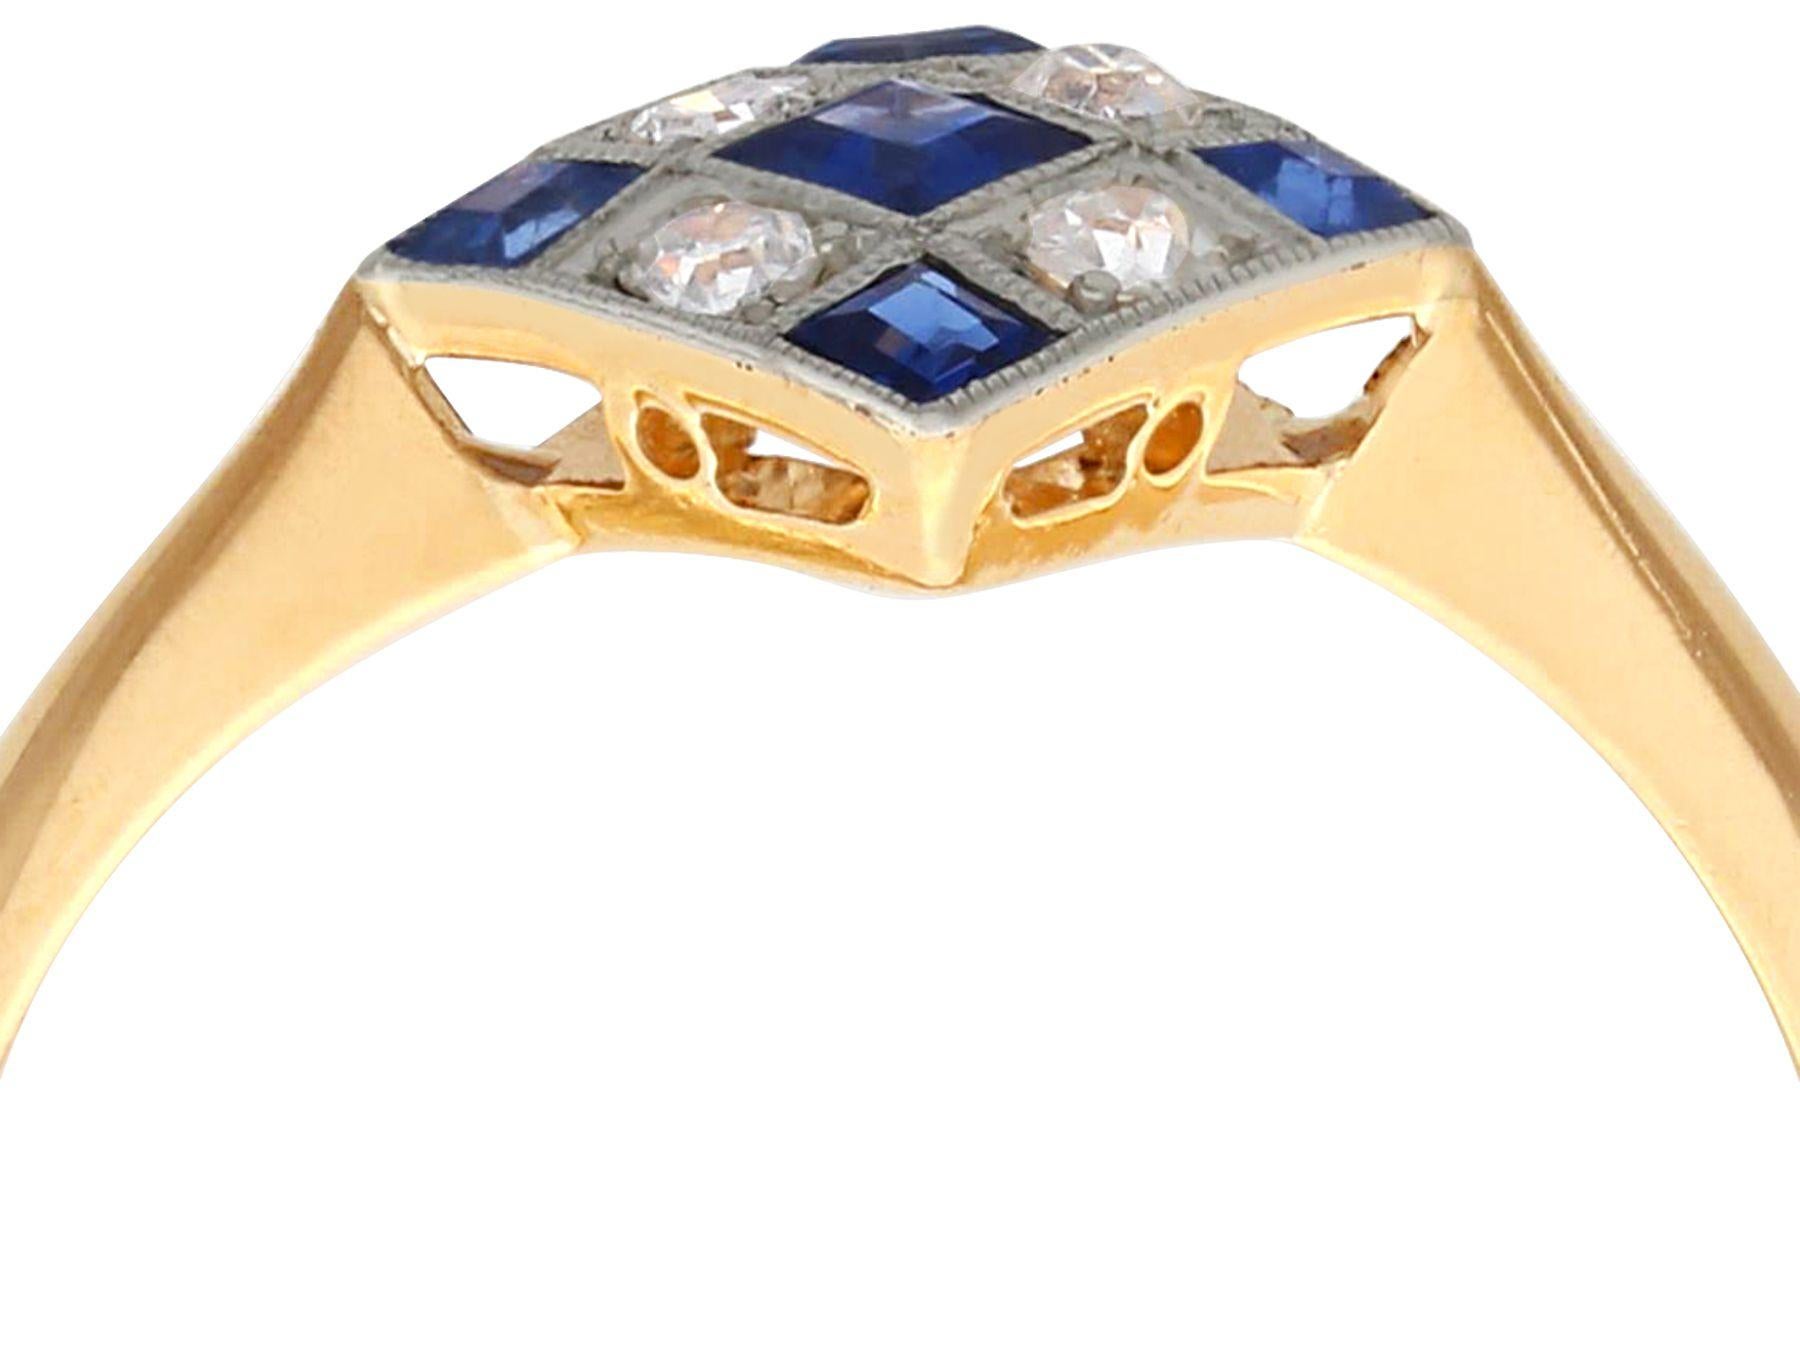 An impressive antique and contemporary 0.28 carat sapphire and 0.12 carat diamond, 22 karat gold dress ring; part of our diverse gemstone jewelry and collections.

This fine and impressive sapphire and diamond ring has been crafted in 22k yellow